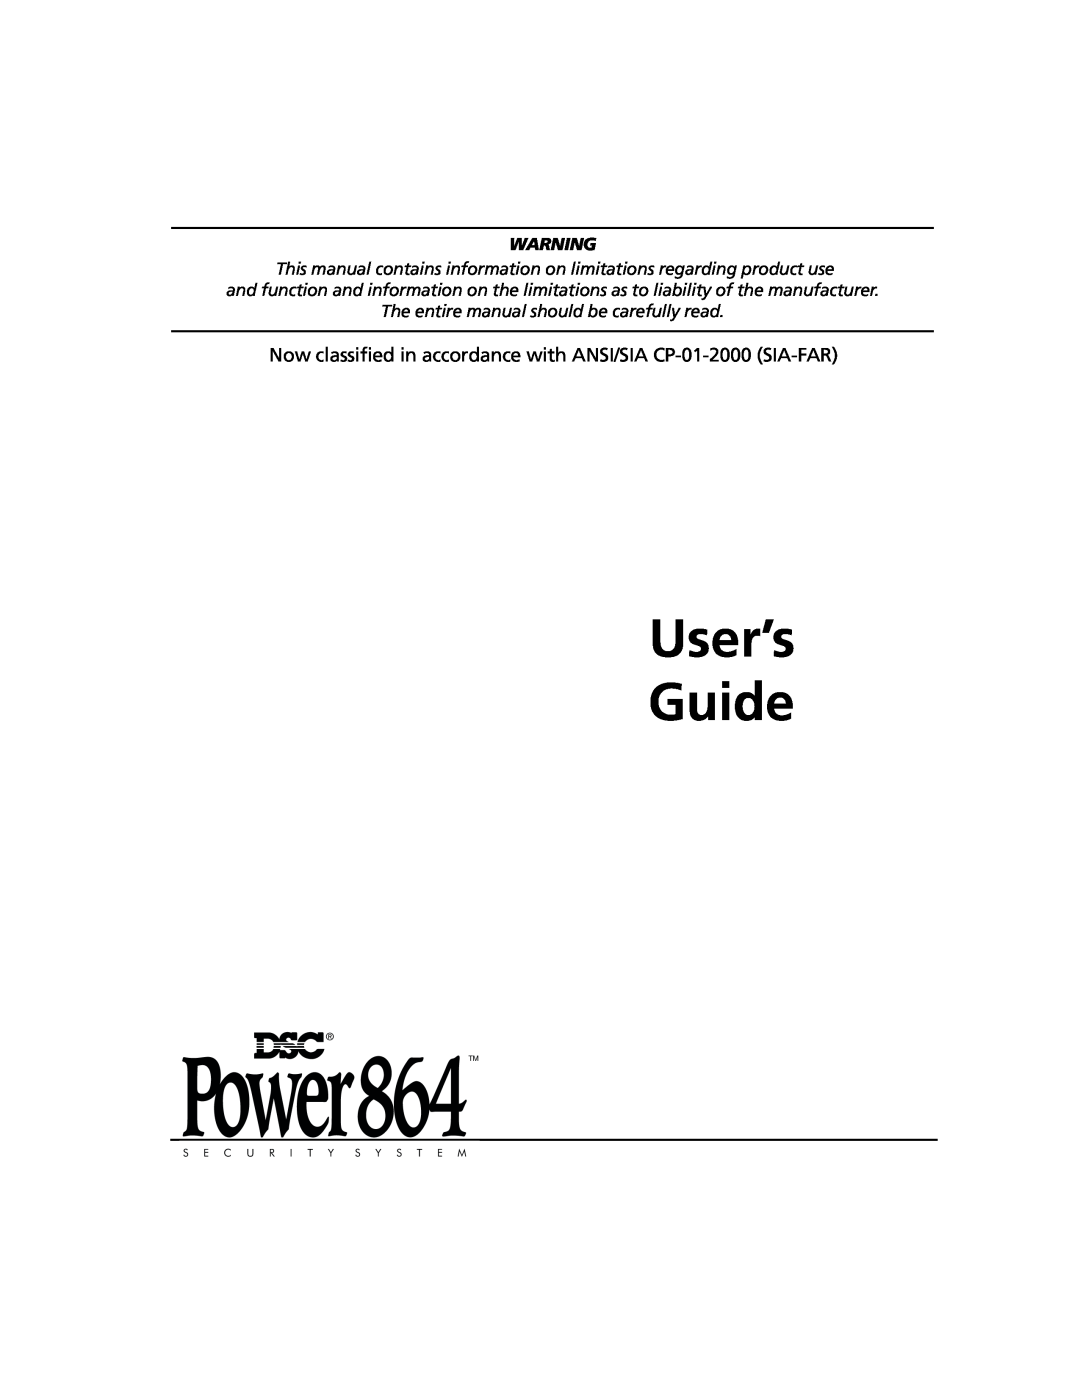 ADT Security Services Power 864 manual The entire manual should be carefully read, Power864TM, User’s Guide 